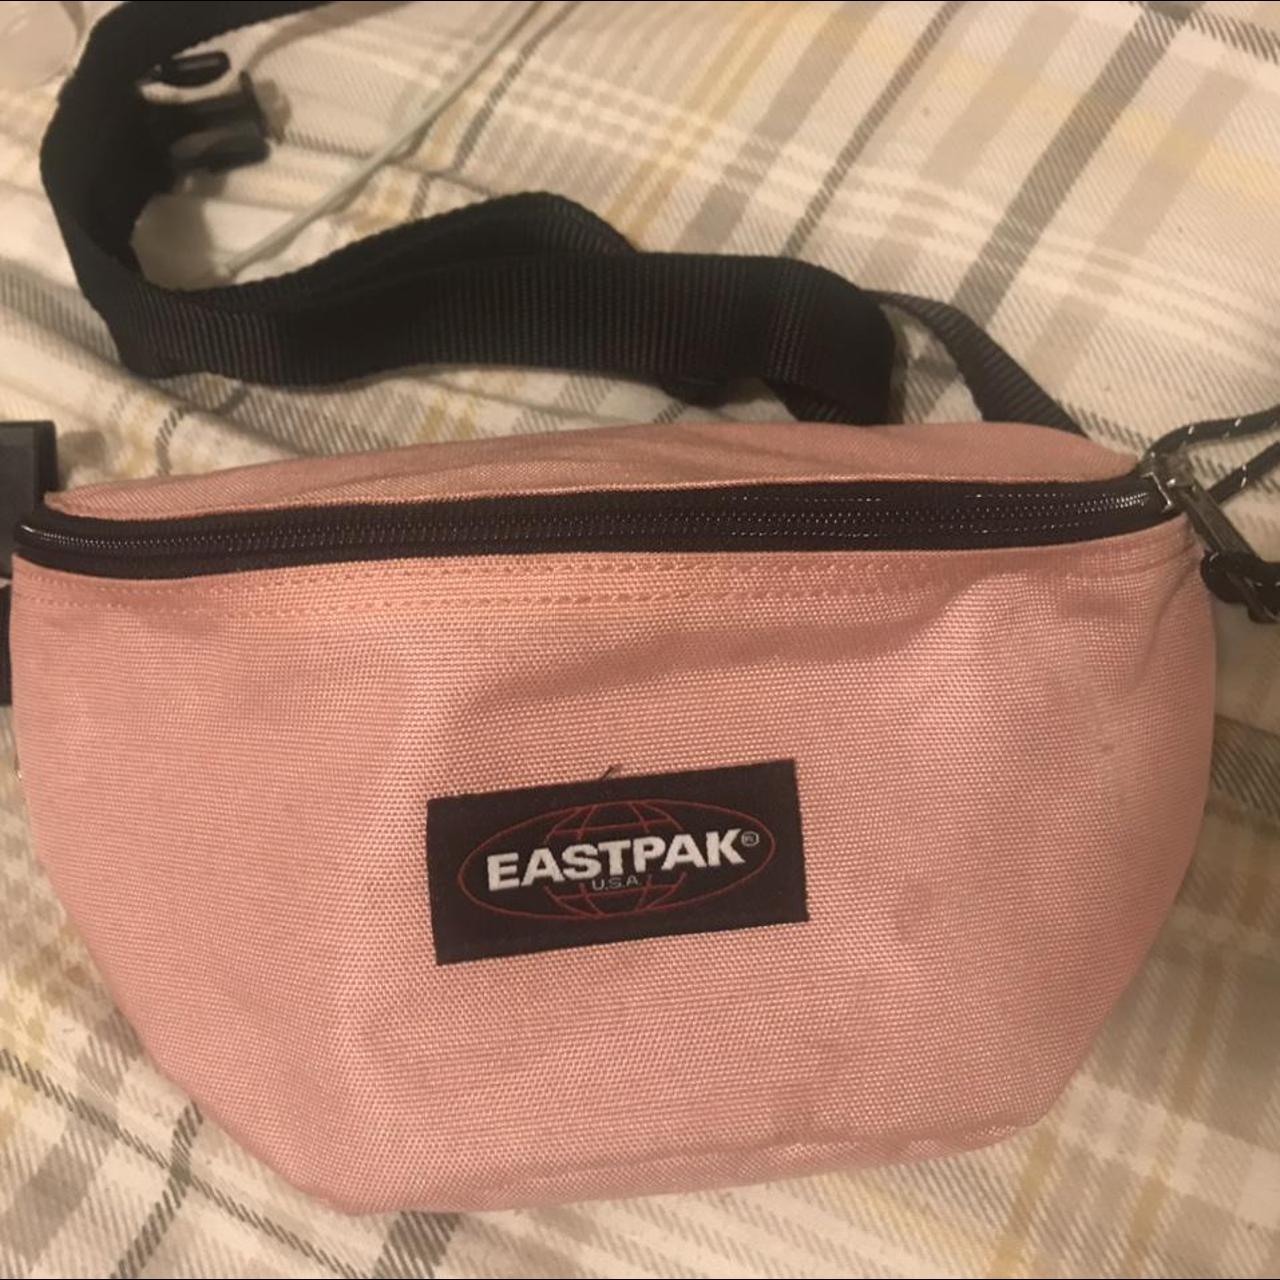 Product Image 1 - Eastpak pink fanny pack bum